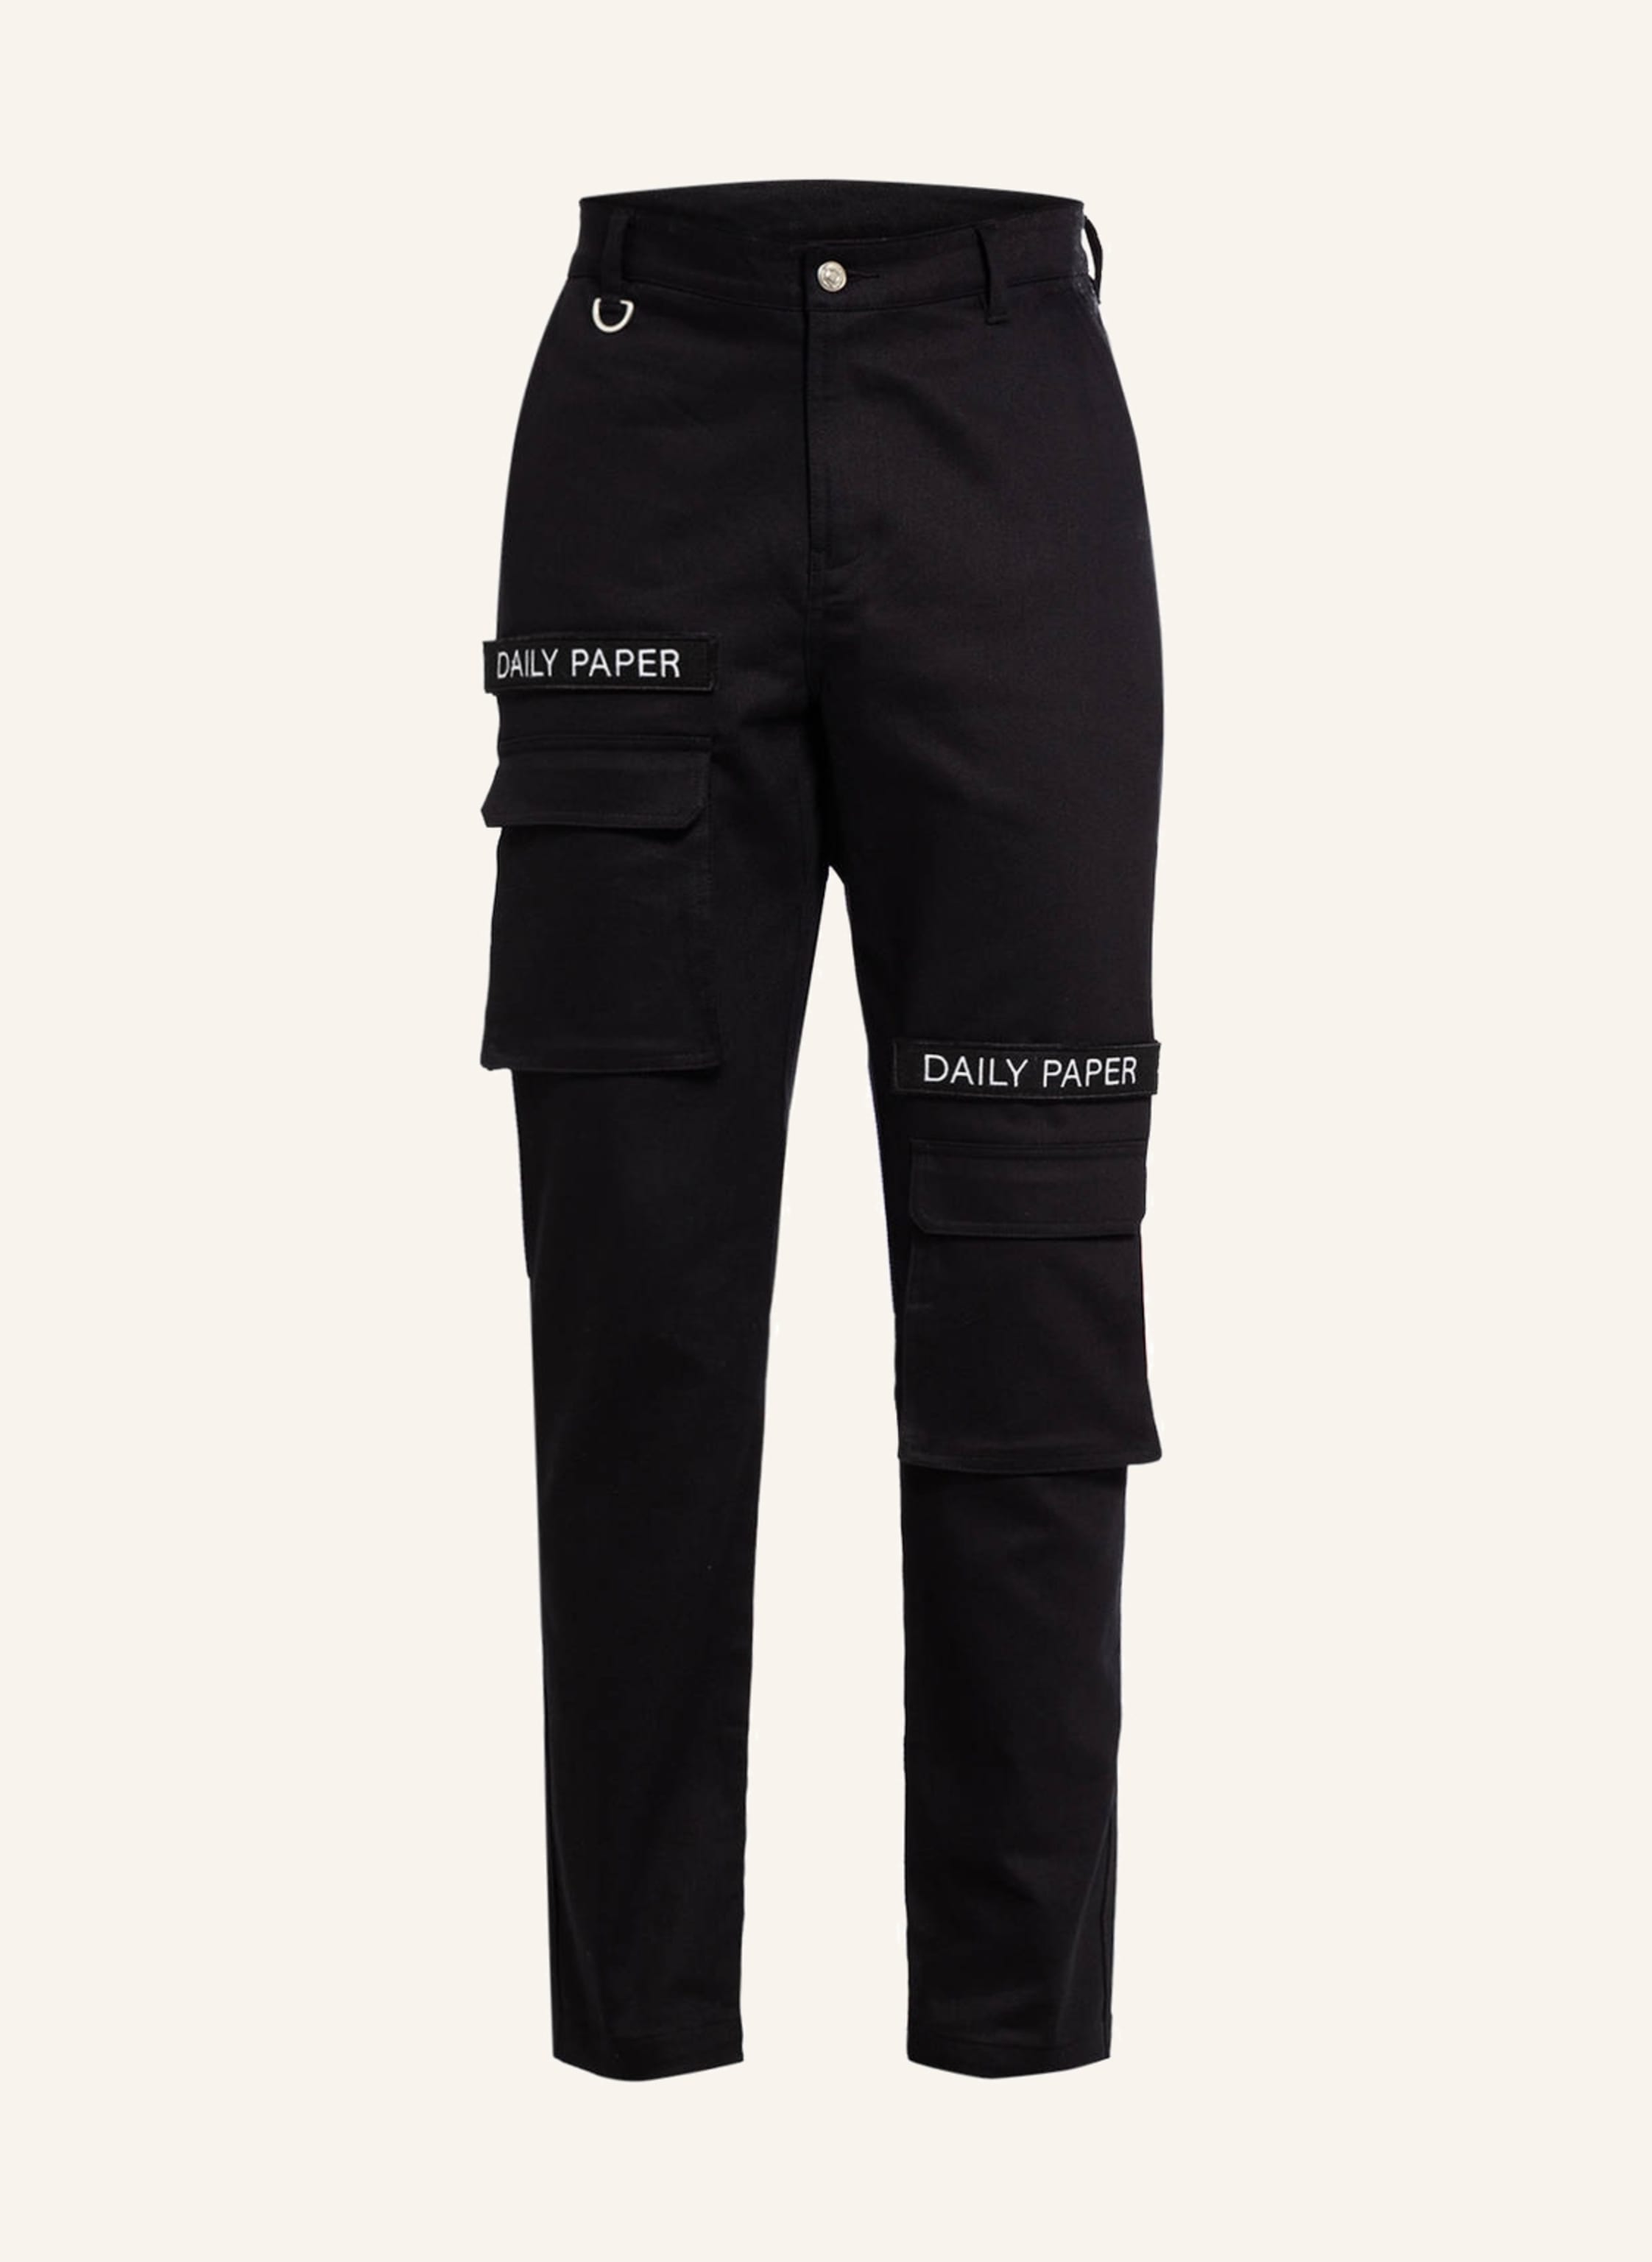 DAILY PAPER Cargo pants in black